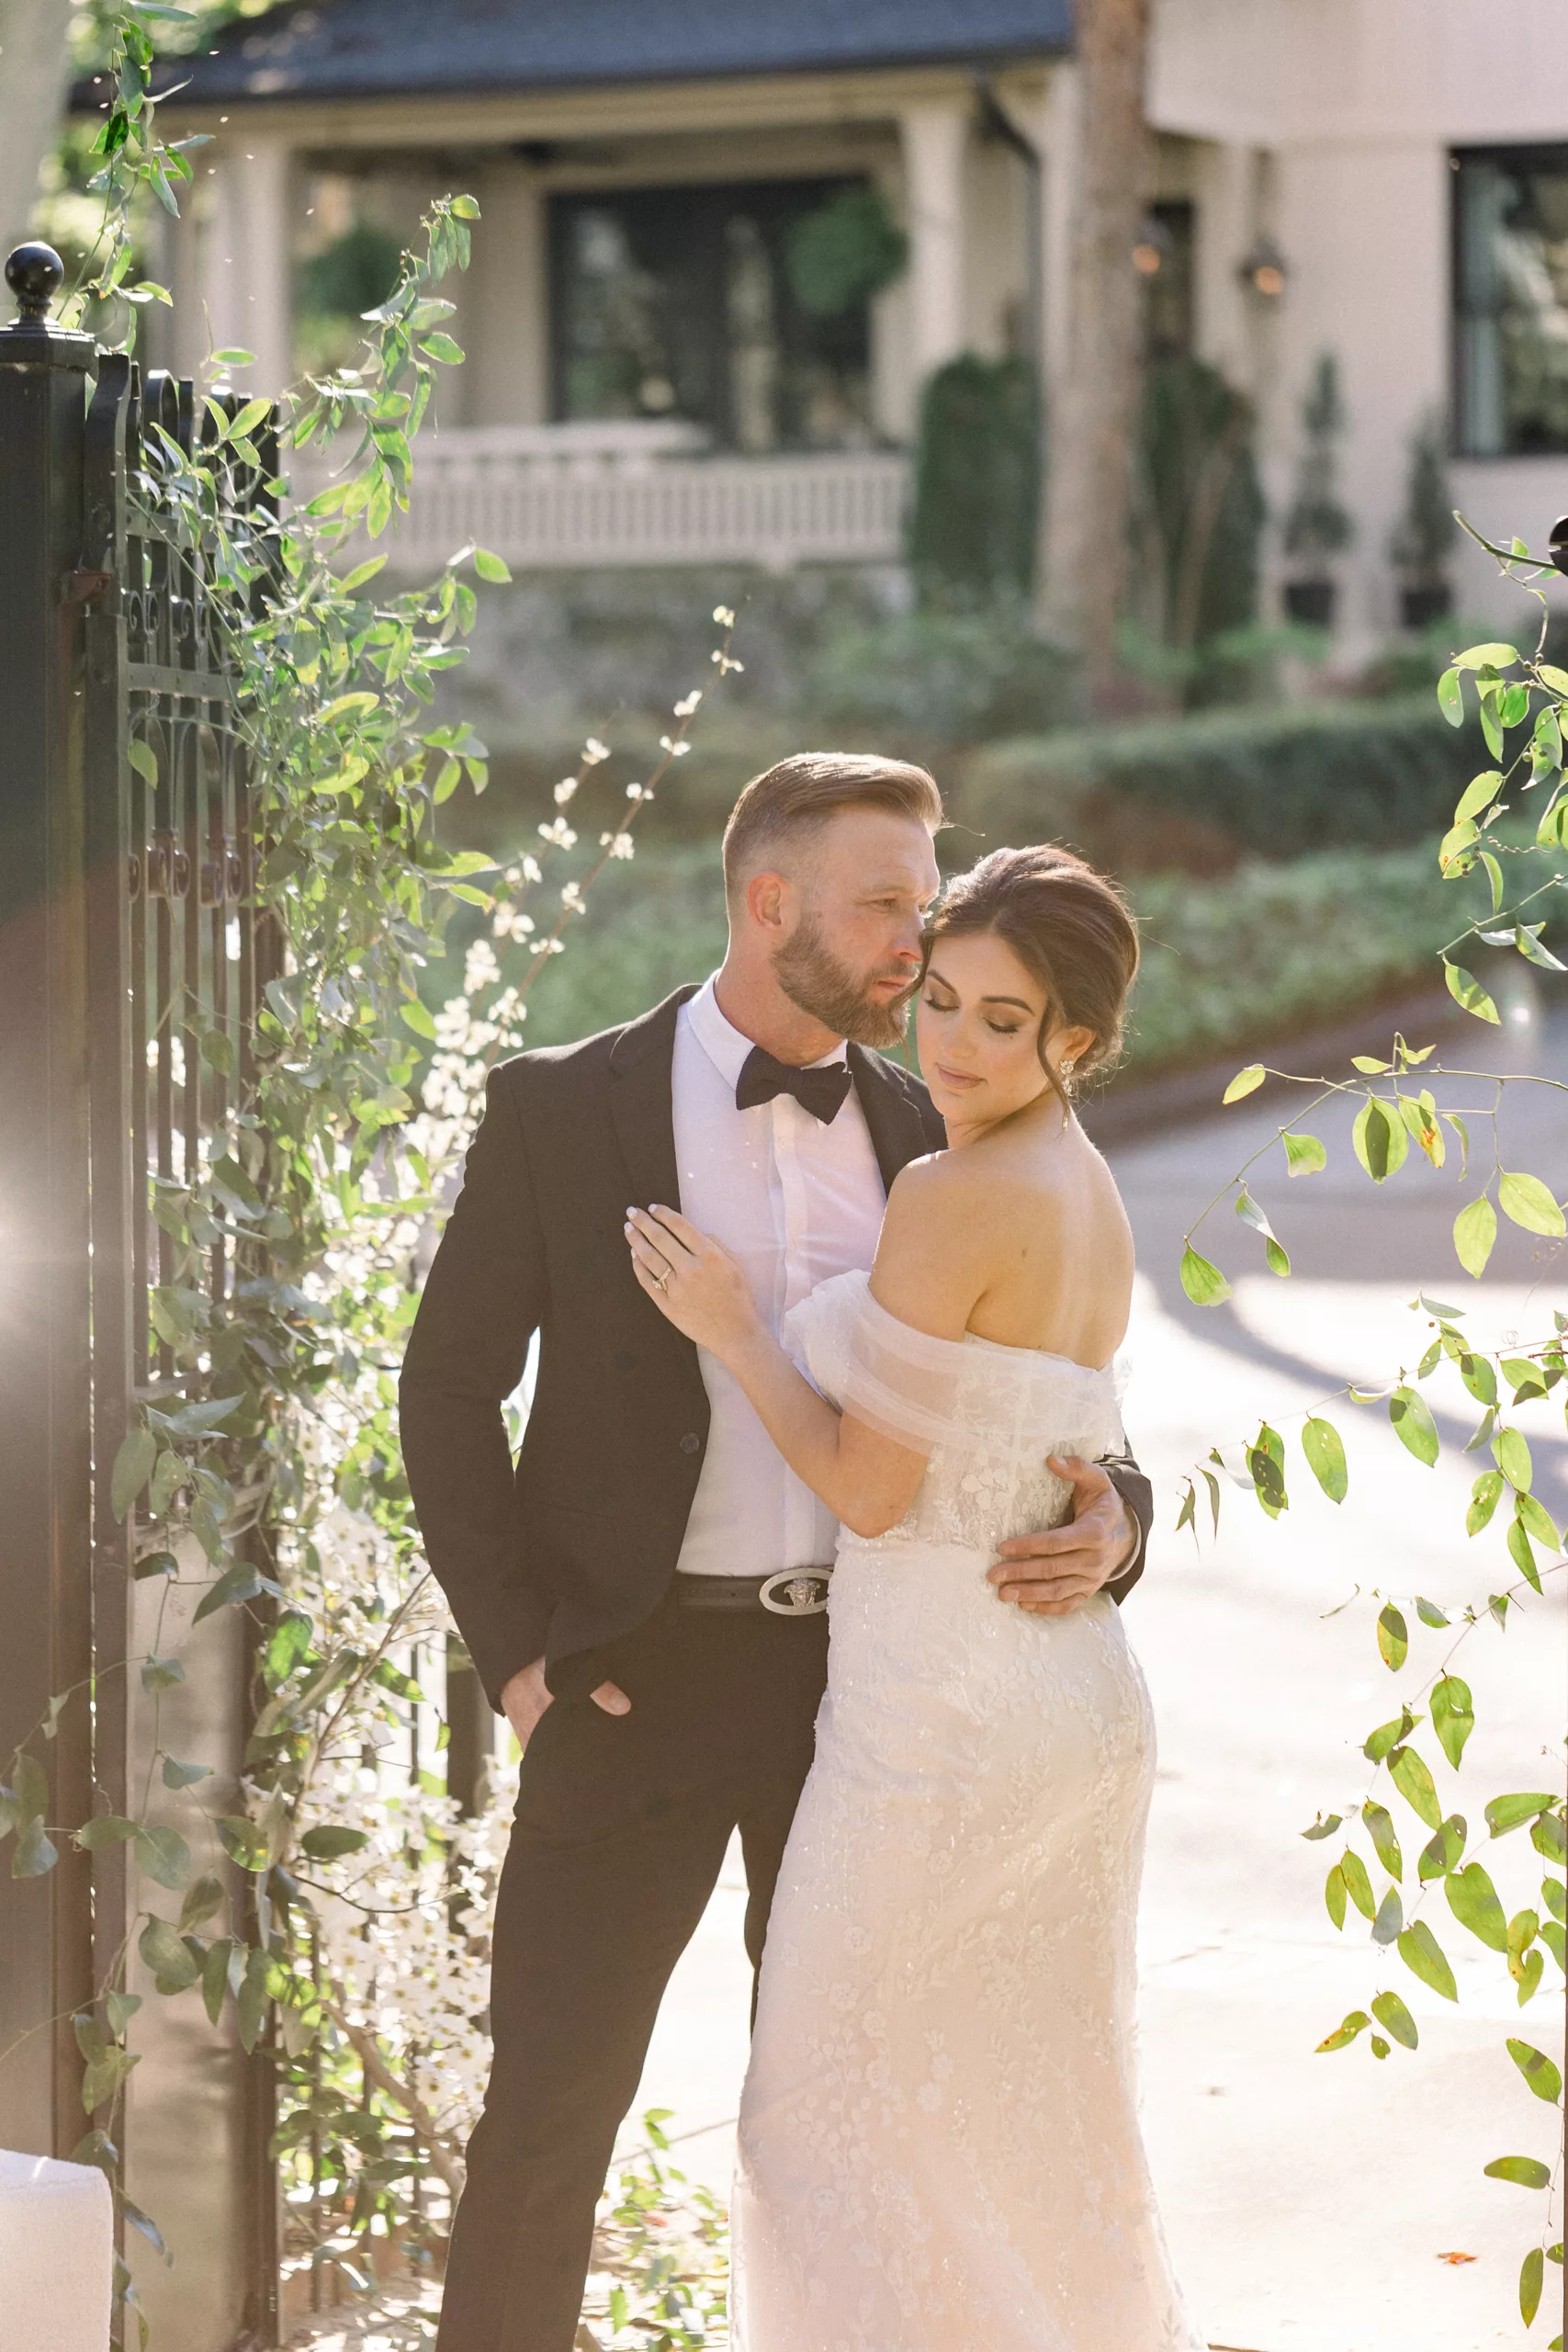 Newlyweds embrace each other while standing by a large iron gate covered in vines Wedding Photography Timeline